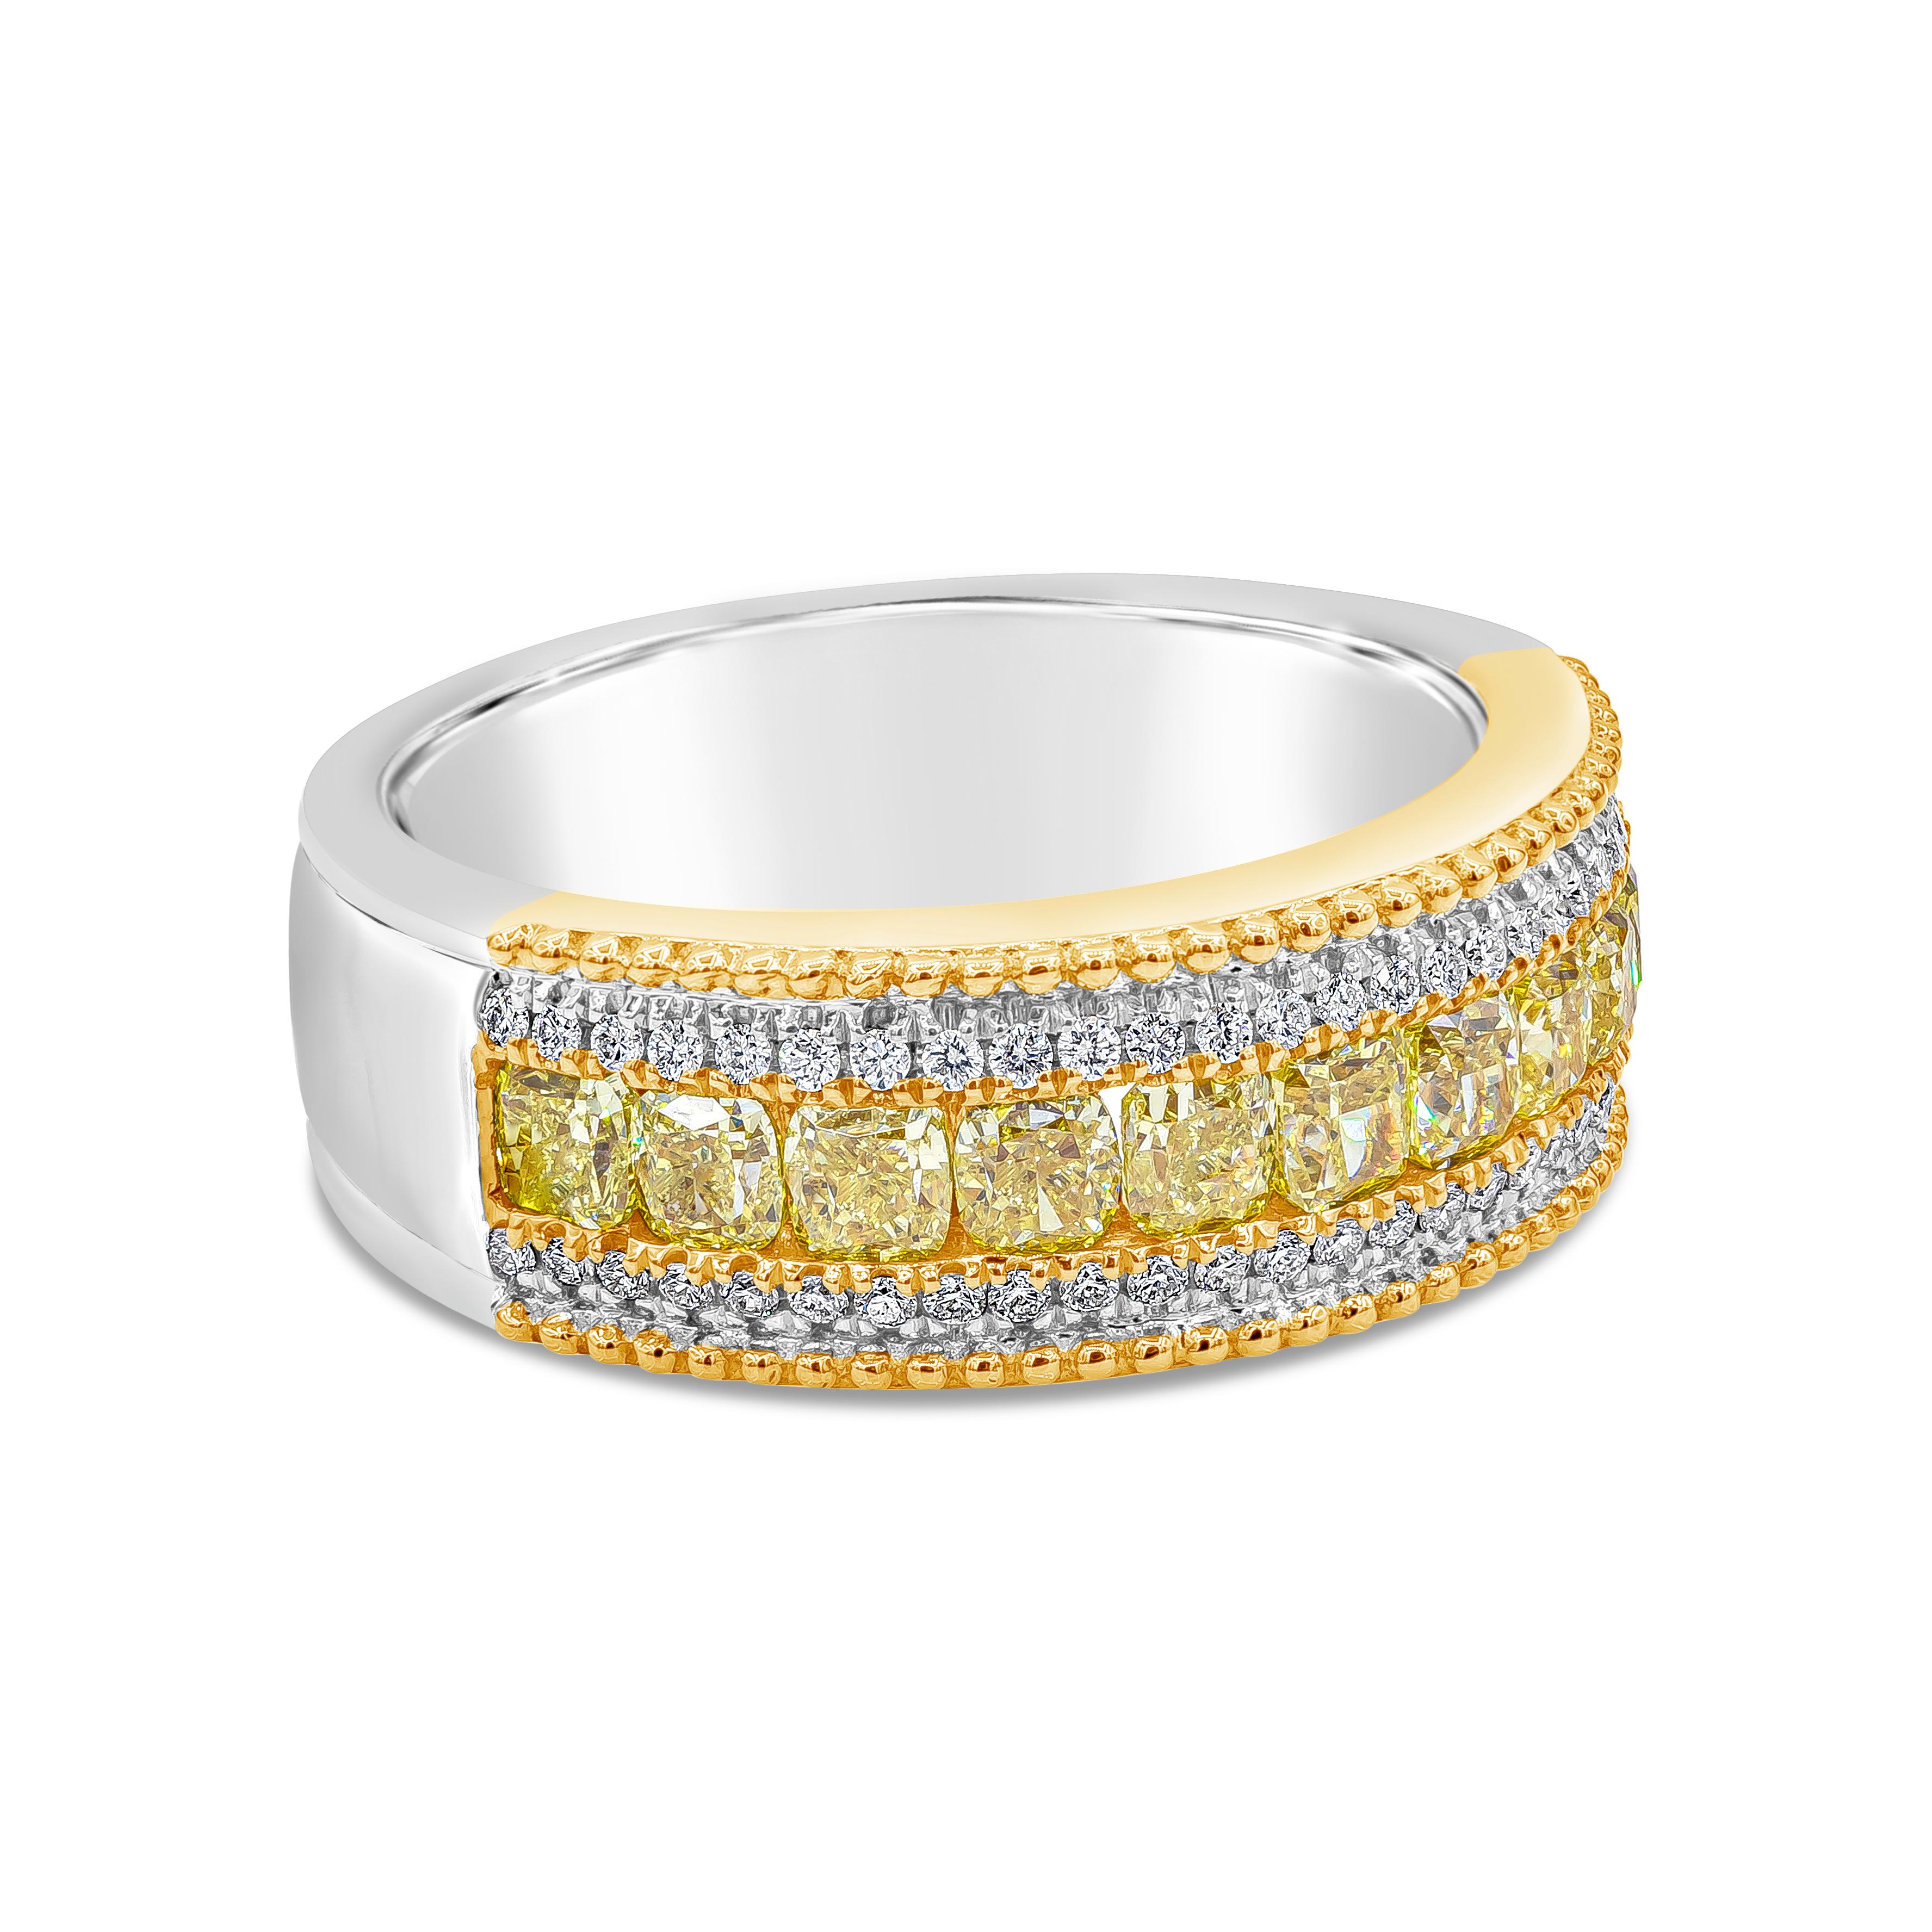 A unique and fashionable ring, showcasing a row of cushion cut fancy yellow diamonds weighing 1.42 carats total, channel set between round brilliant diamonds weighing 0.18 carats total. Finished with beaded edges made of 18K white and yellow gold.